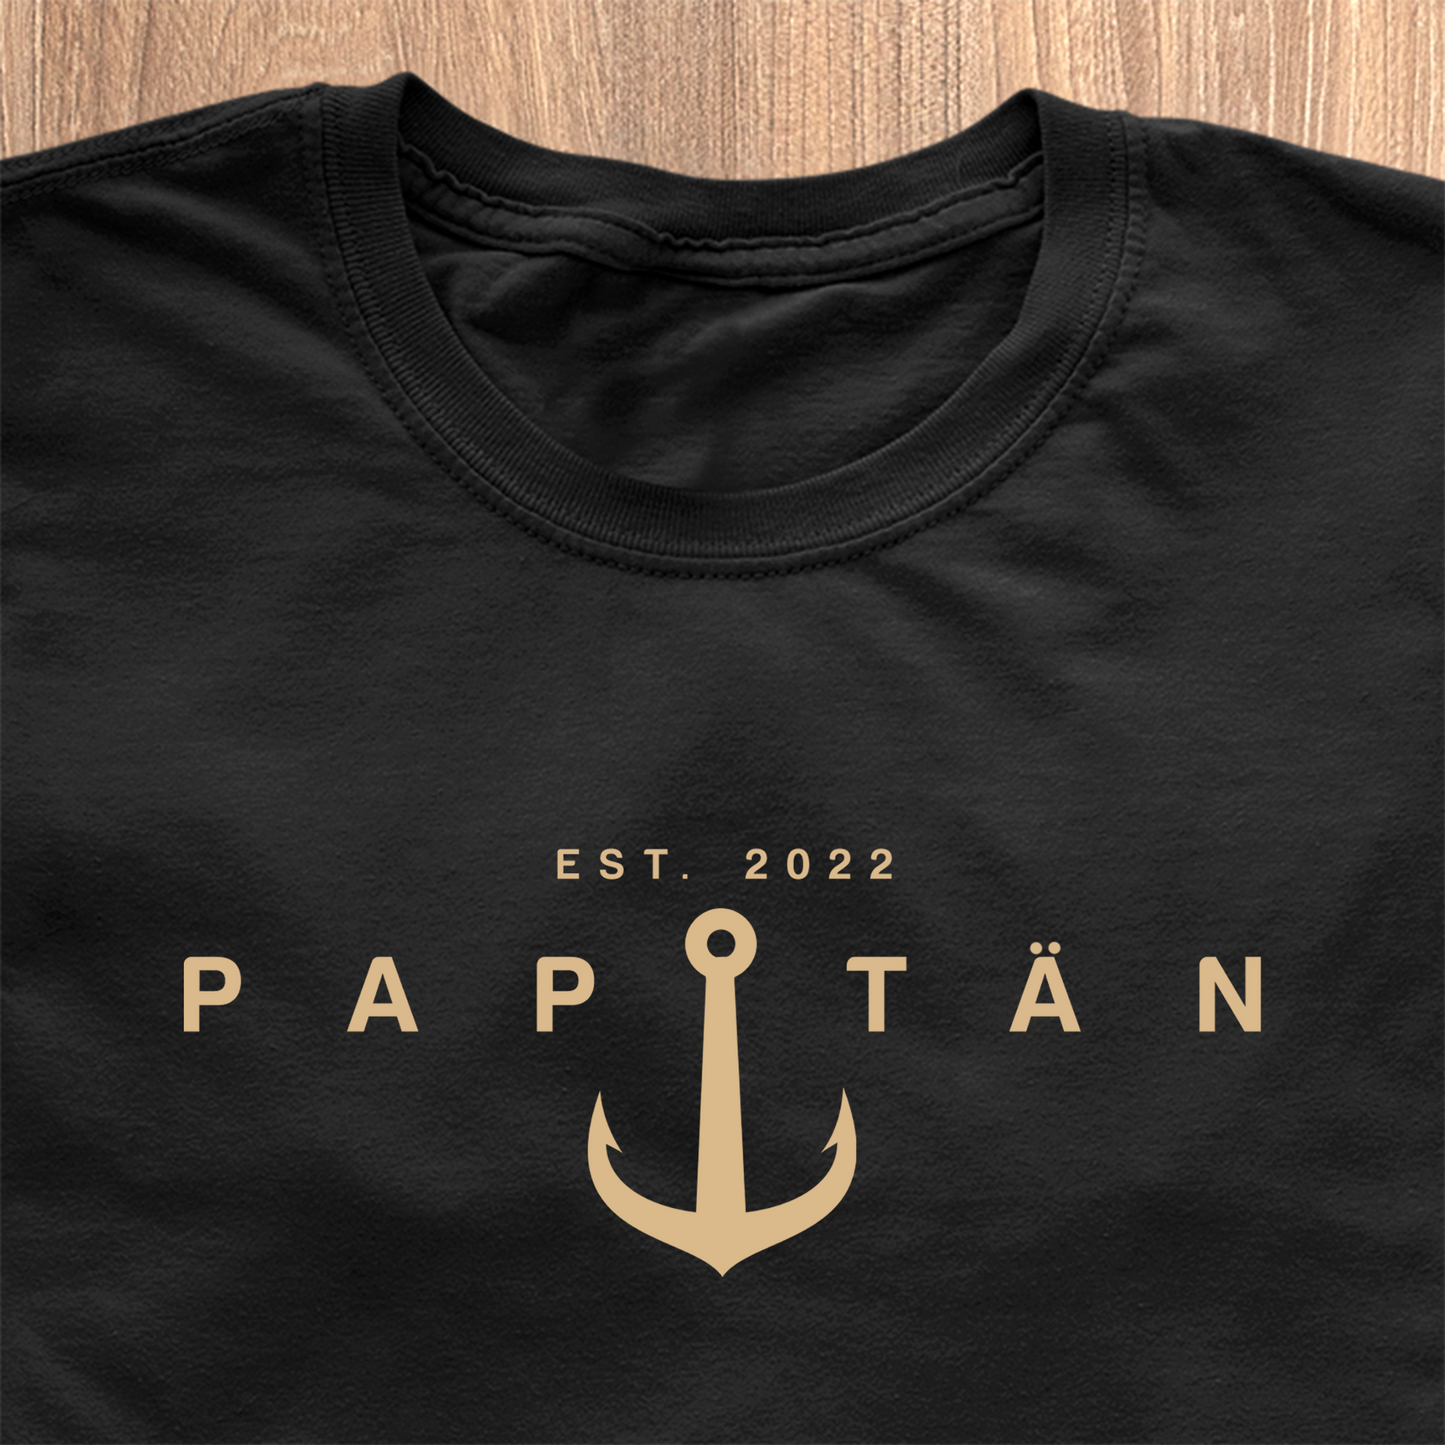 Papitan Modern Edition T-Shirt - Date can be personalised